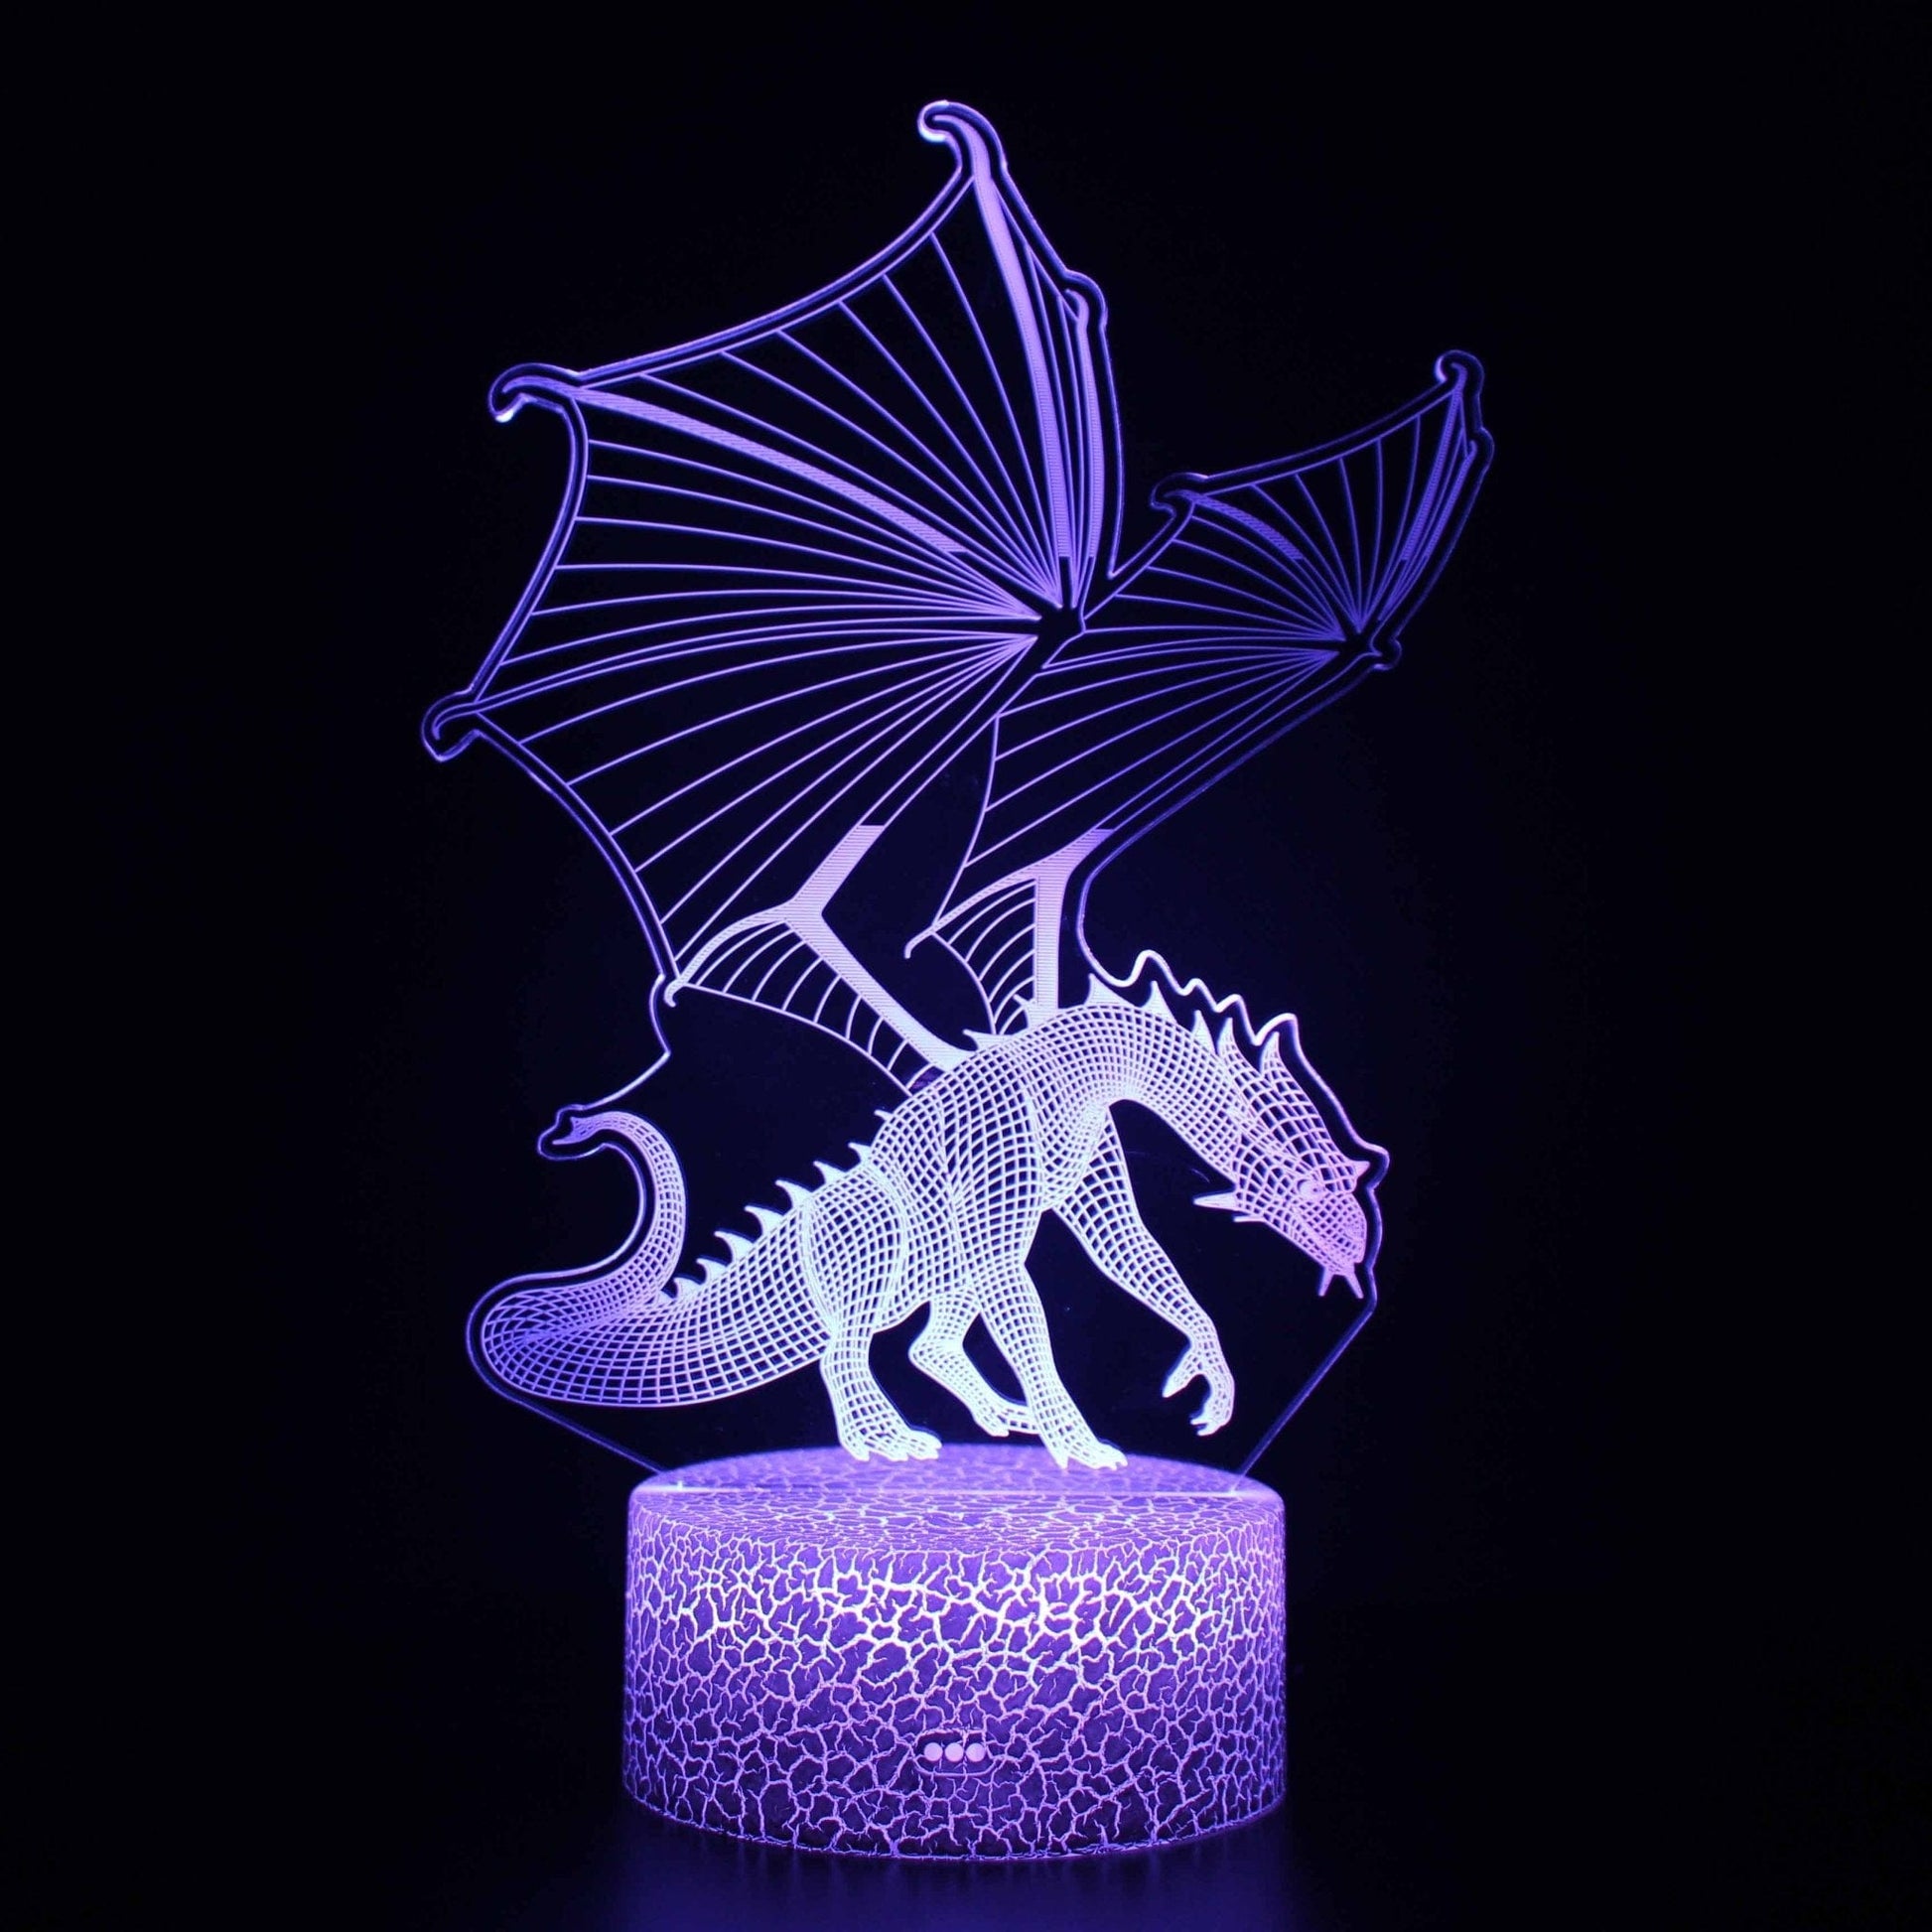 Dinosaur Series 3D Table Lamp LED Colorful Touch Remote Control Gift Nightlight - CLASSY CLOSET BOUTIQUEDinosaur Series 3D Table Lamp LED Colorful Touch Remote Control Gift Nightlighteperlo2478D876C1D6494EA96D30D902E4DD2FKX-11777 Colors No Remote